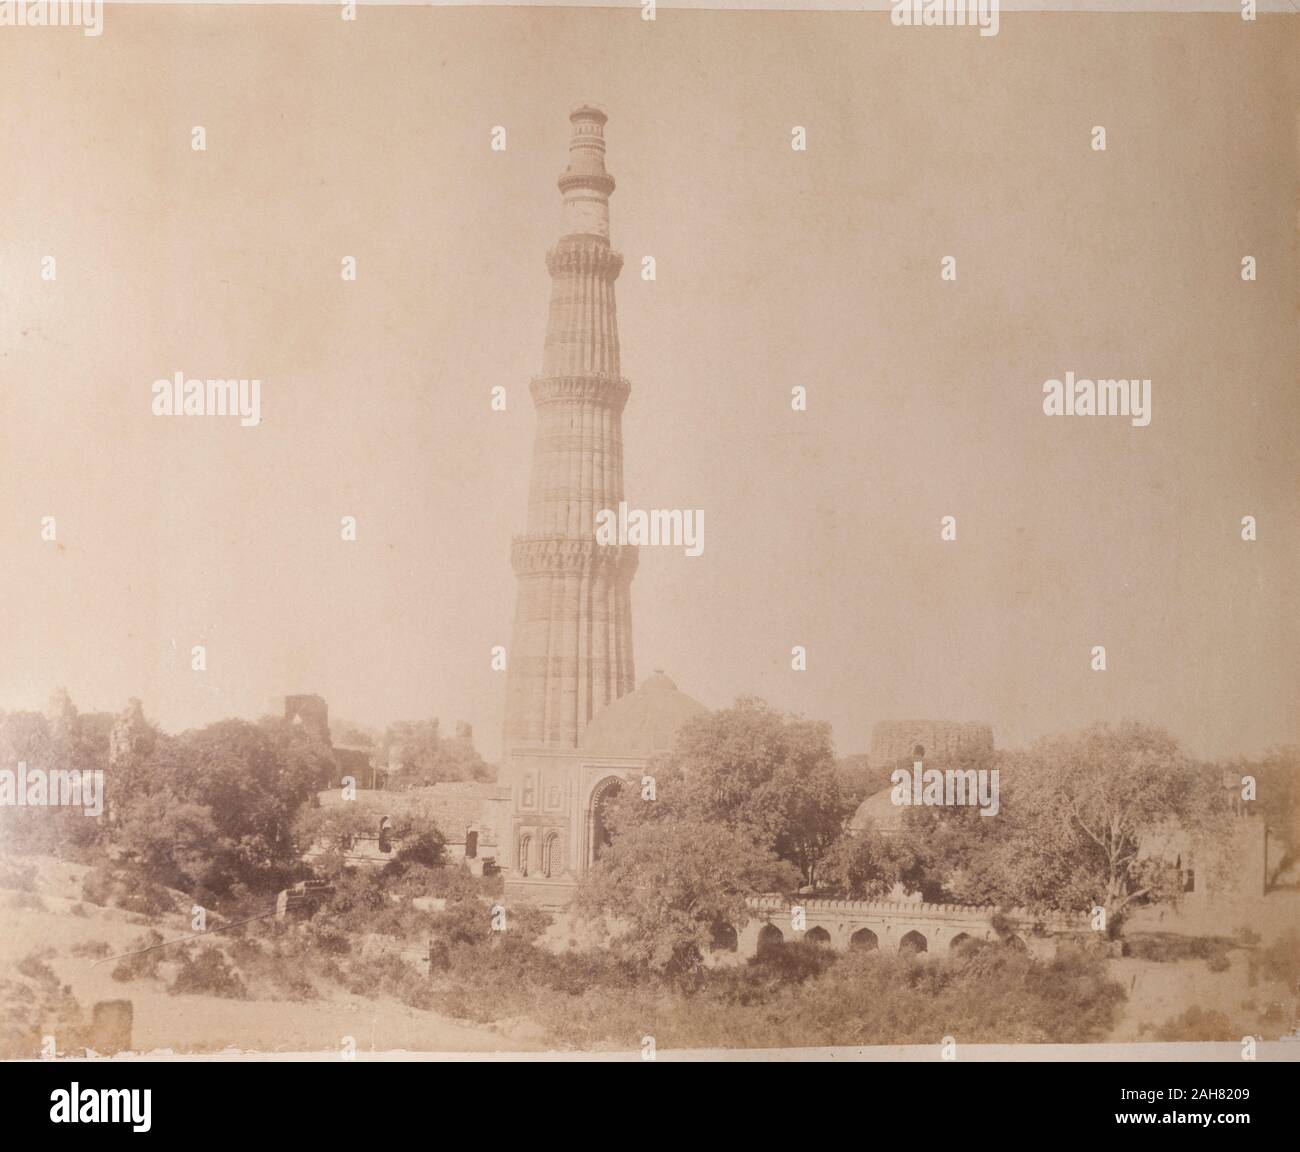 India, View of the Qutb Minar, one of the greatest monuments of Islamic architecture in India. At 72.5 metres tall, the celebratory victory tower was built to accompany the Quwwat-ul-Islam mosque, and was probably inspired by the style of Afghan minarets. Original manuscript caption:The Kutub near Delhi, circa 1890. 2003/071/1/1/2/54. Stock Photo